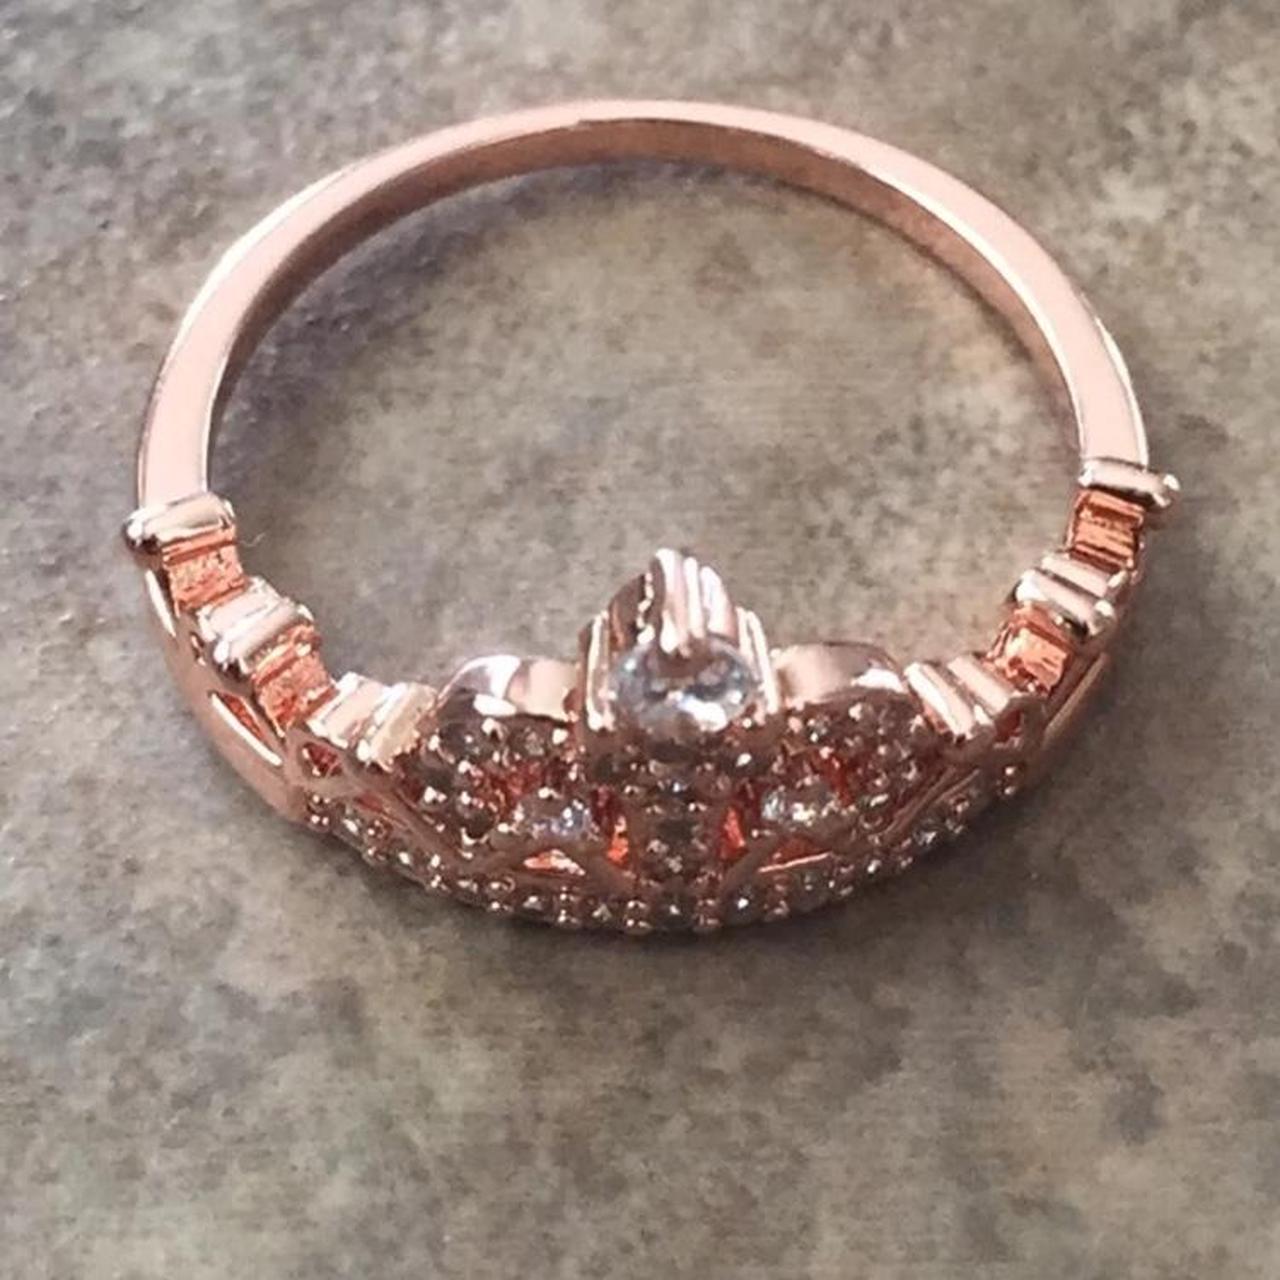 Product Image 3 - Rose gold princess crown ring
Condition: